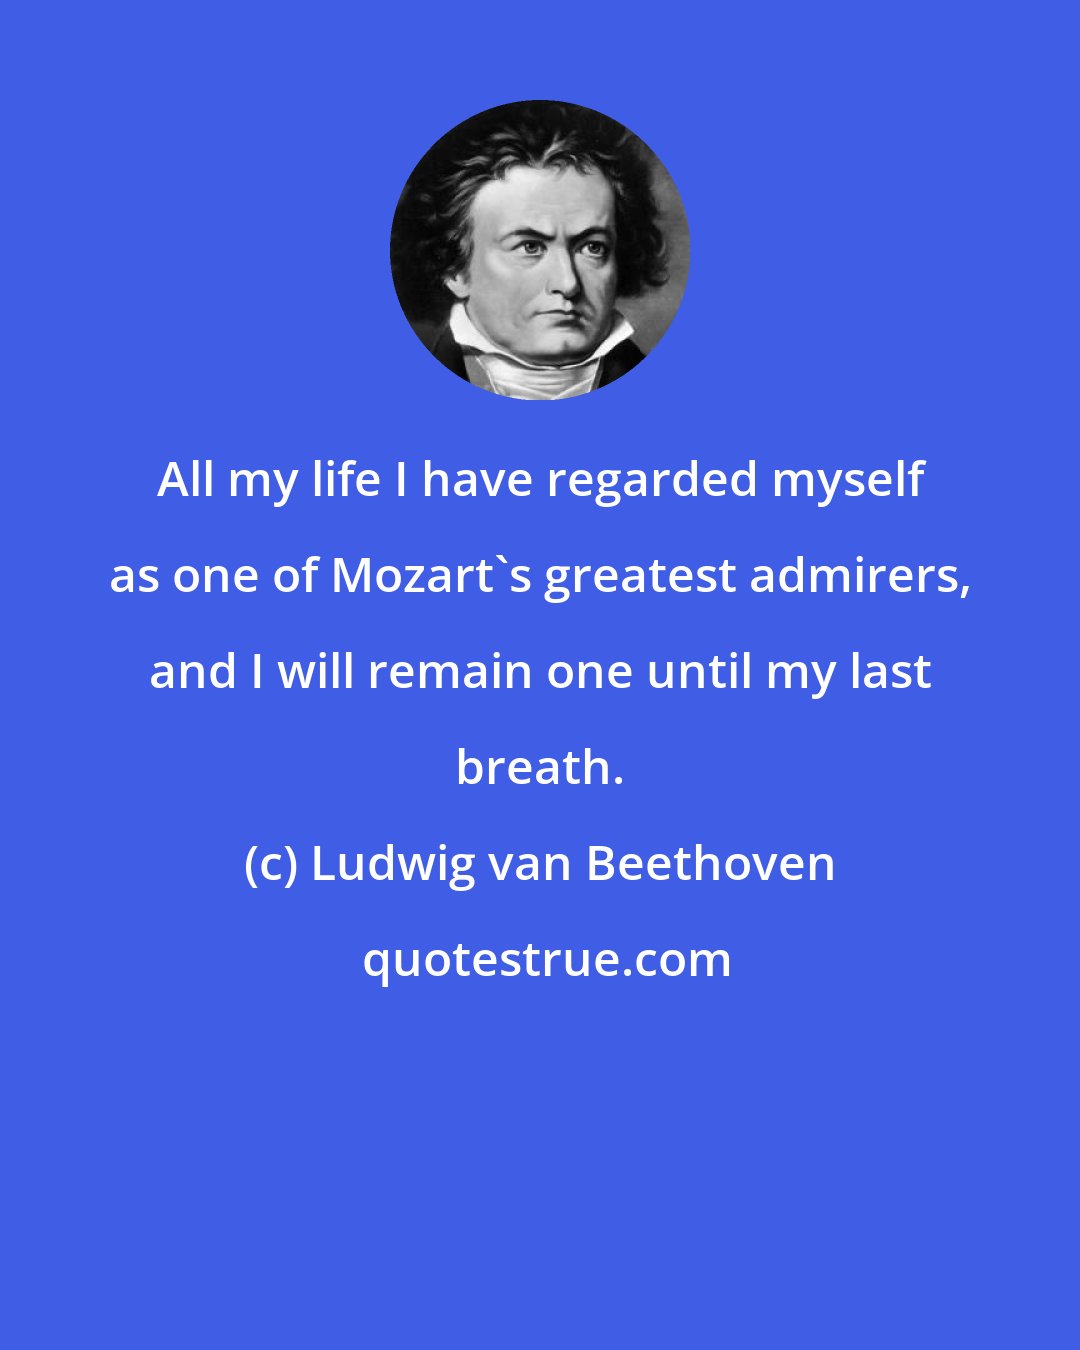 Ludwig van Beethoven: All my life I have regarded myself as one of Mozart's greatest admirers, and I will remain one until my last breath.